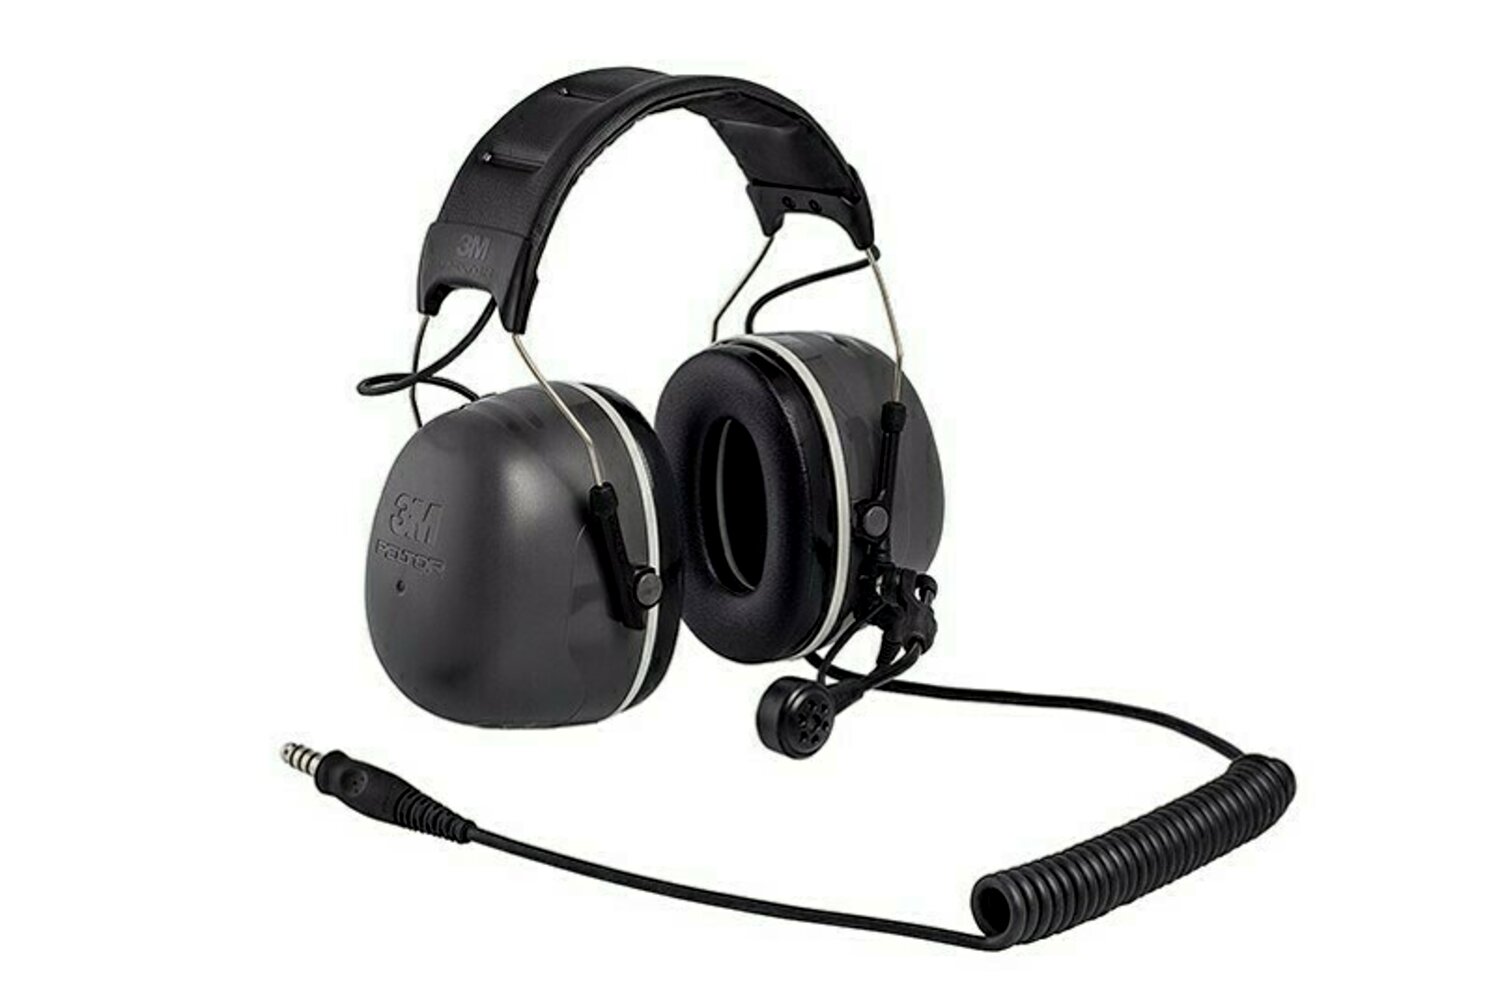 7100099883 - 3M PELTOR CH-5 High Attenuation Headset - MT73H450A-86 - NATO Wired -
Headband - 31dB NRR